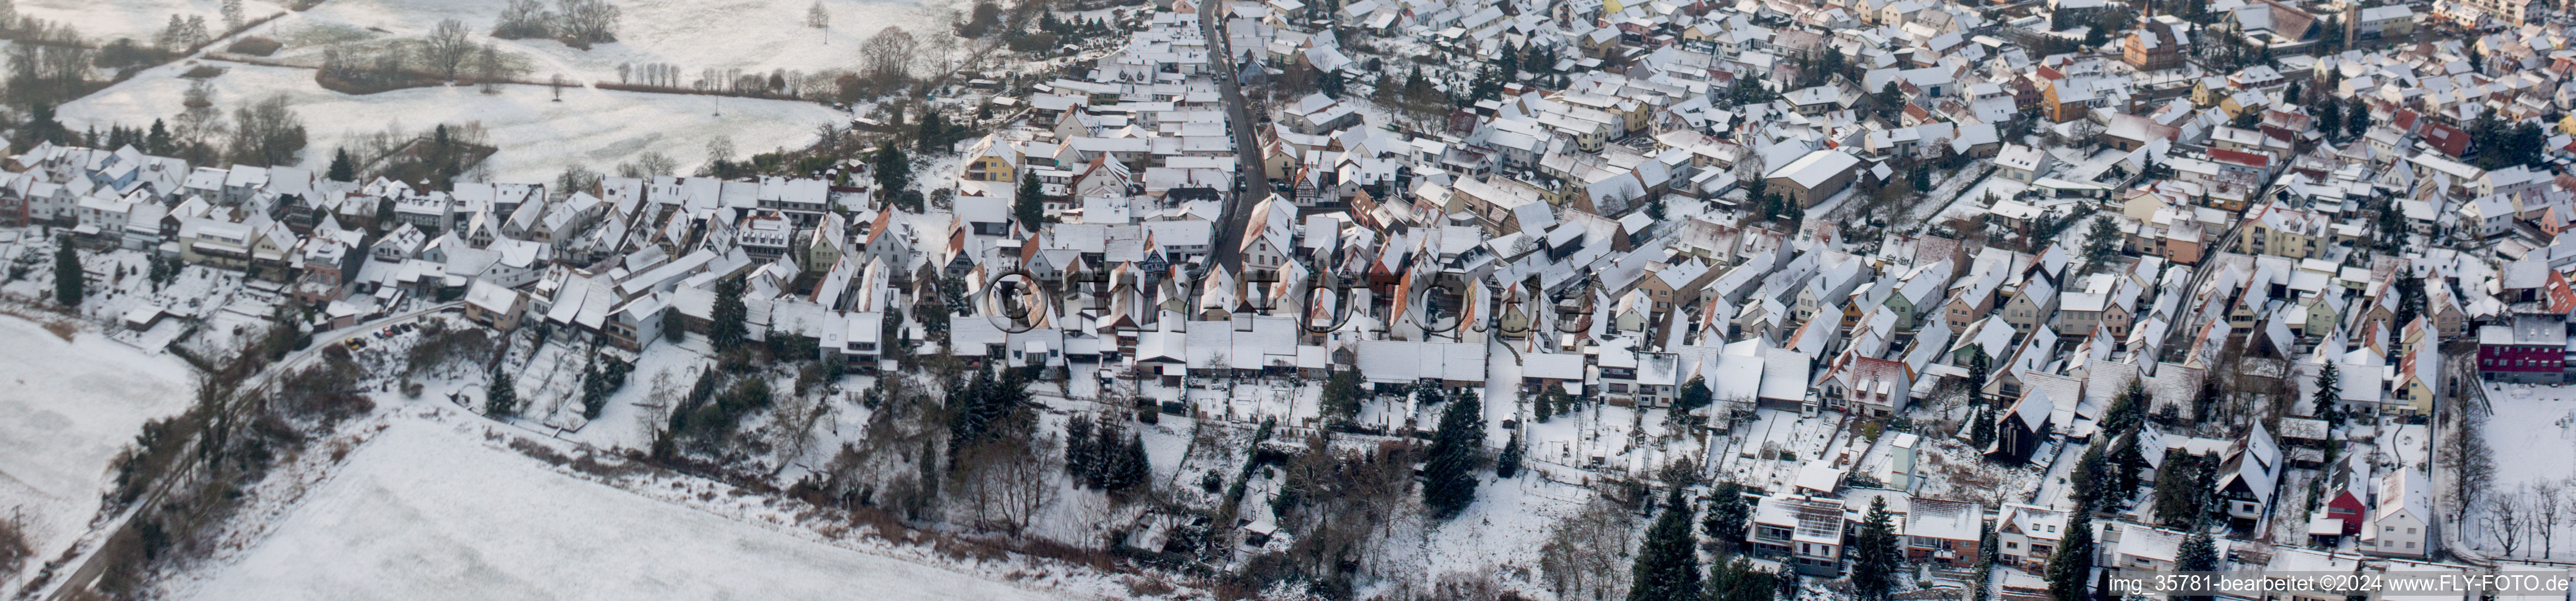 Wintry snowy Village view in Jockgrim in the state Rhineland-Palatinate, Germany